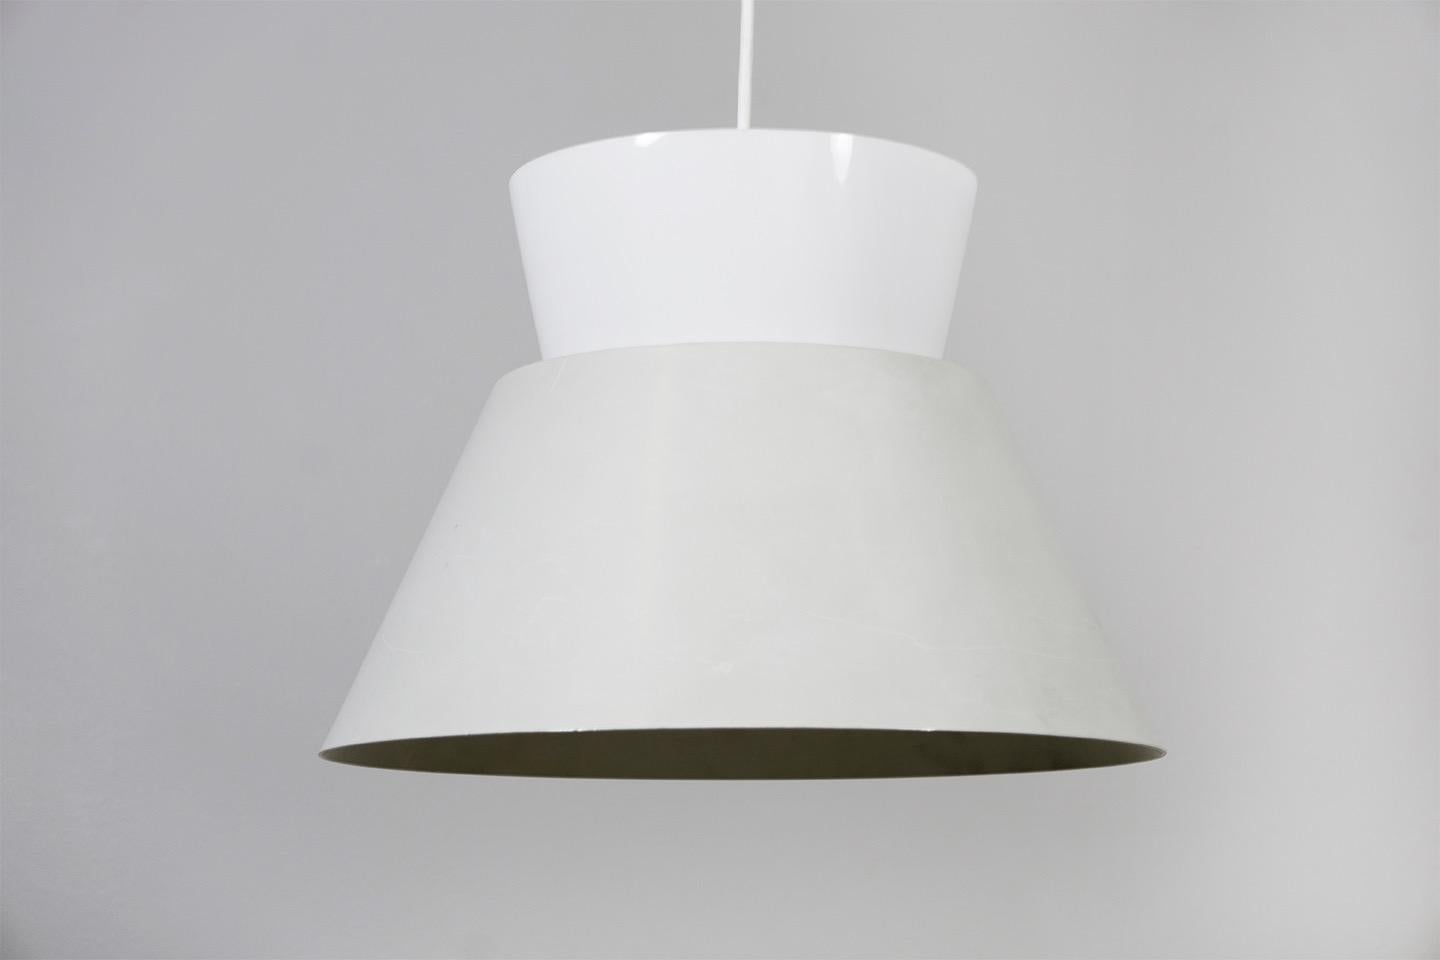 Ceiling lamp made of white acrylic and light grey lacquered aluminium
Dimensions / H.24,5cm ø 20/35cm
Design / Lisa Johansson-Pape, 1958 
Manufacturer / Orno Finland.
 